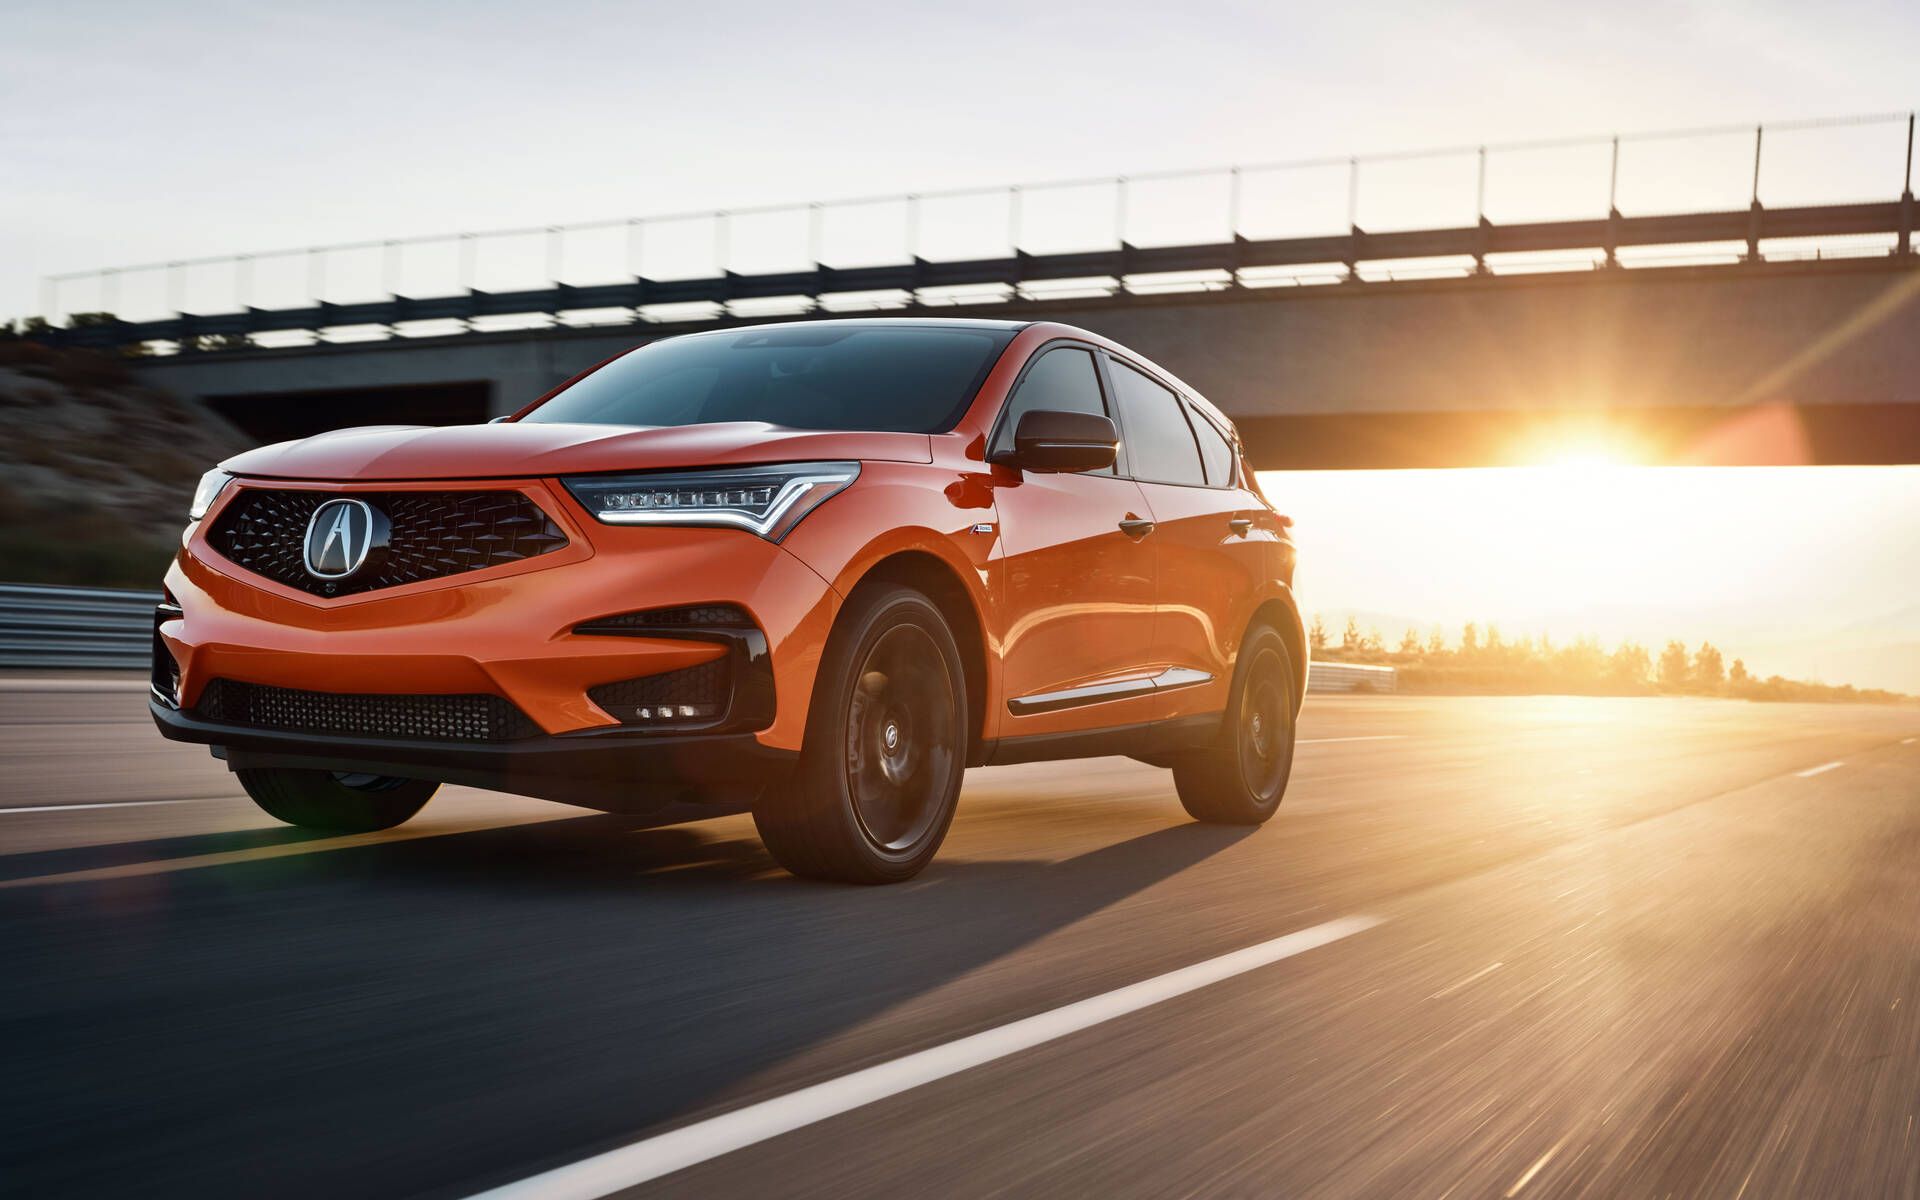 The Acura RDX driving with a low sun in the background